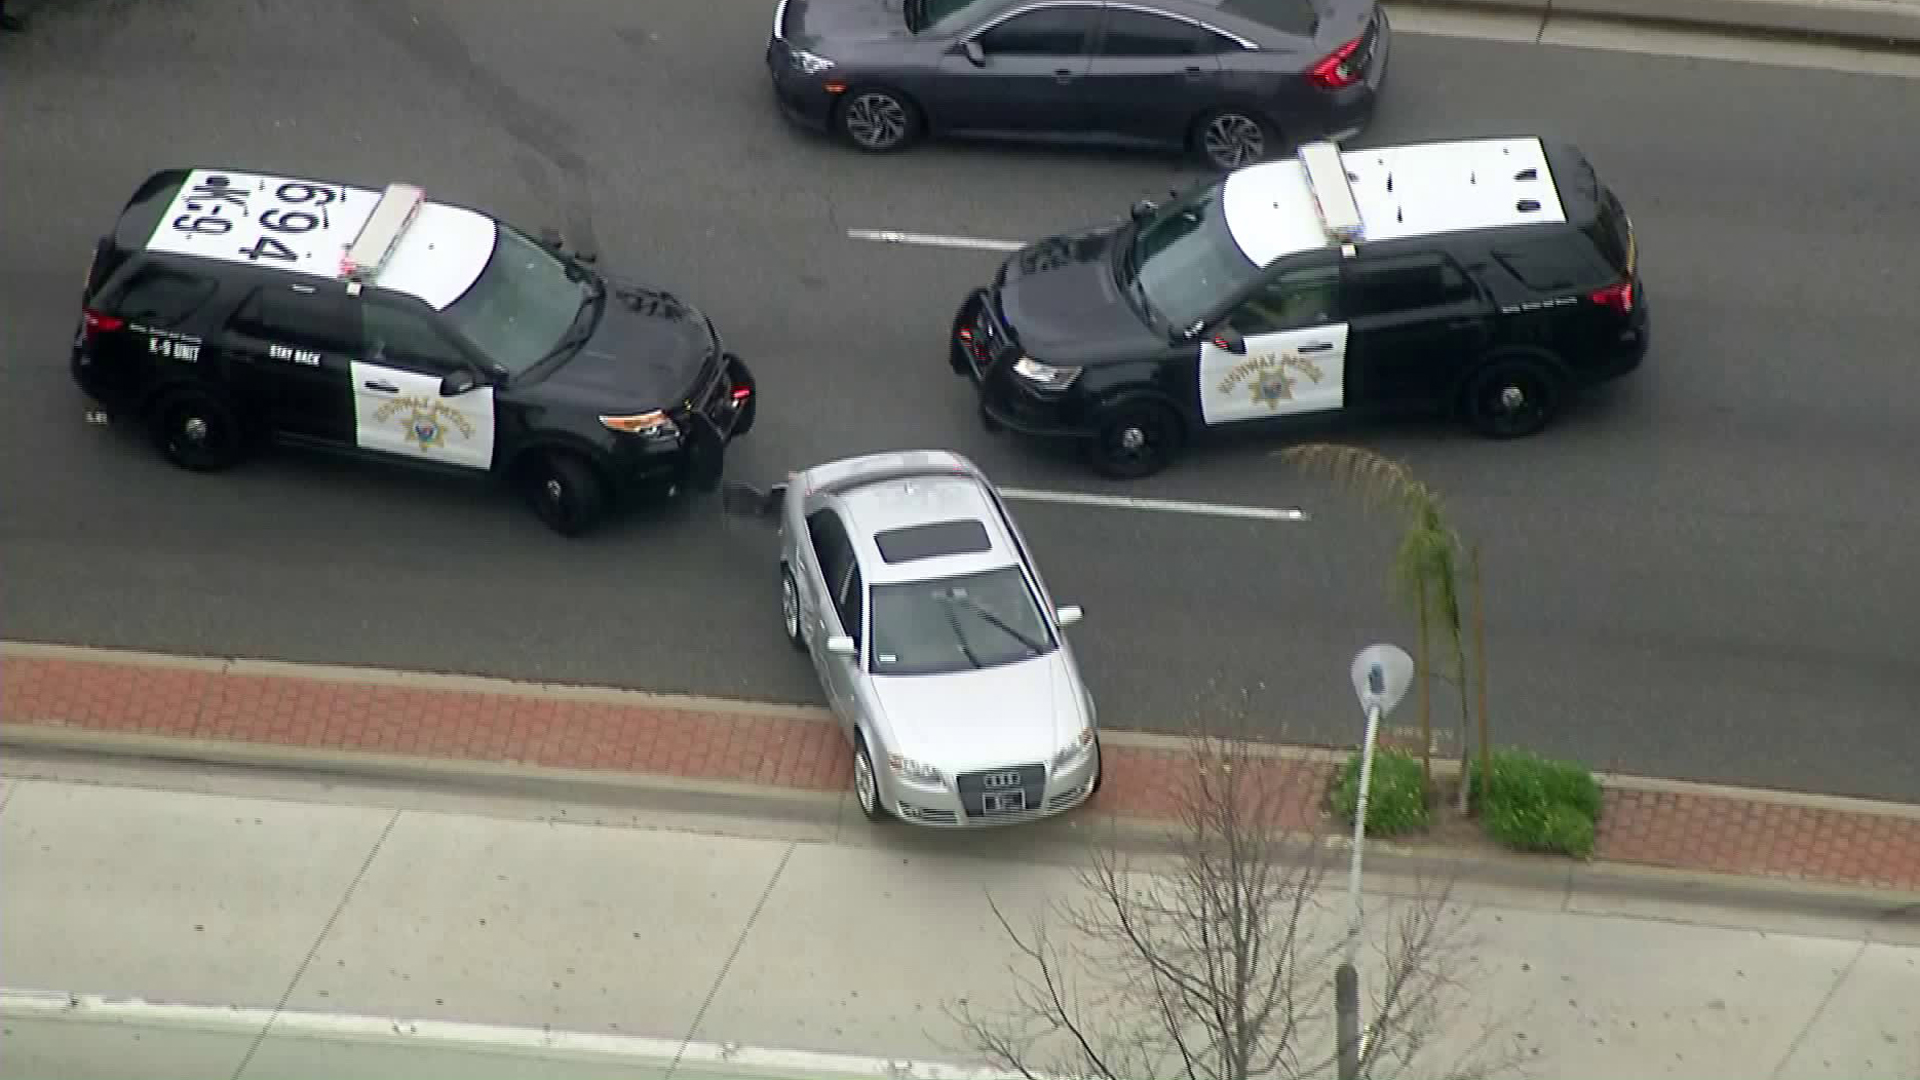 The driver of a stolen Audi flees after two CHP vehicles attempted to stop him on May 1, 2018. (Credit: KTLA)